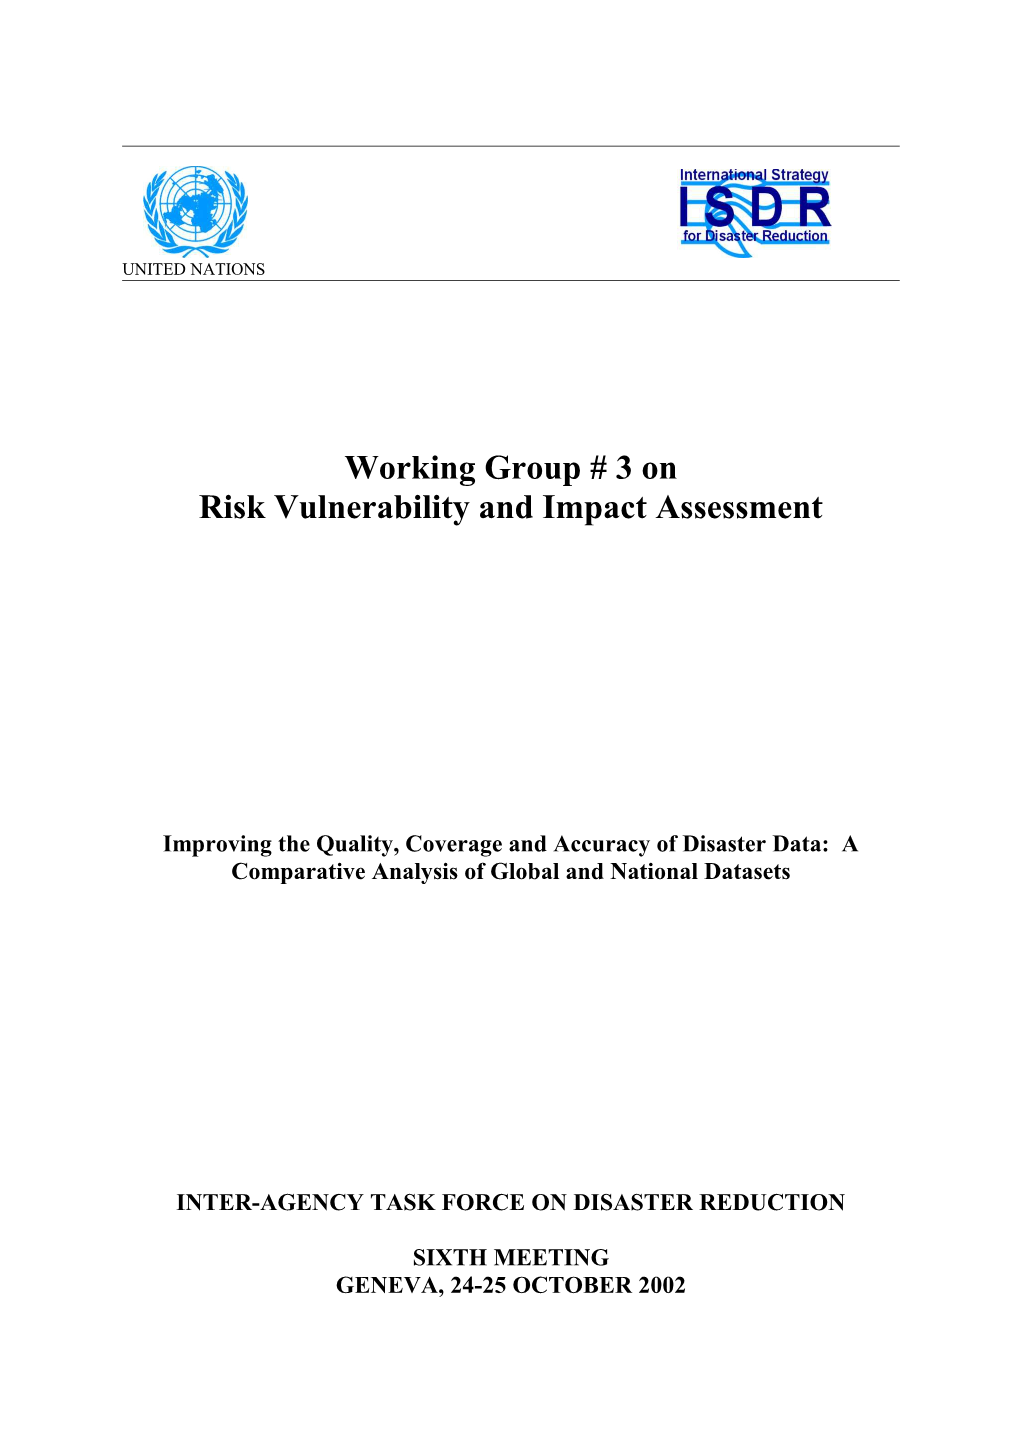 Risk Vulnerability and Impact Assessment